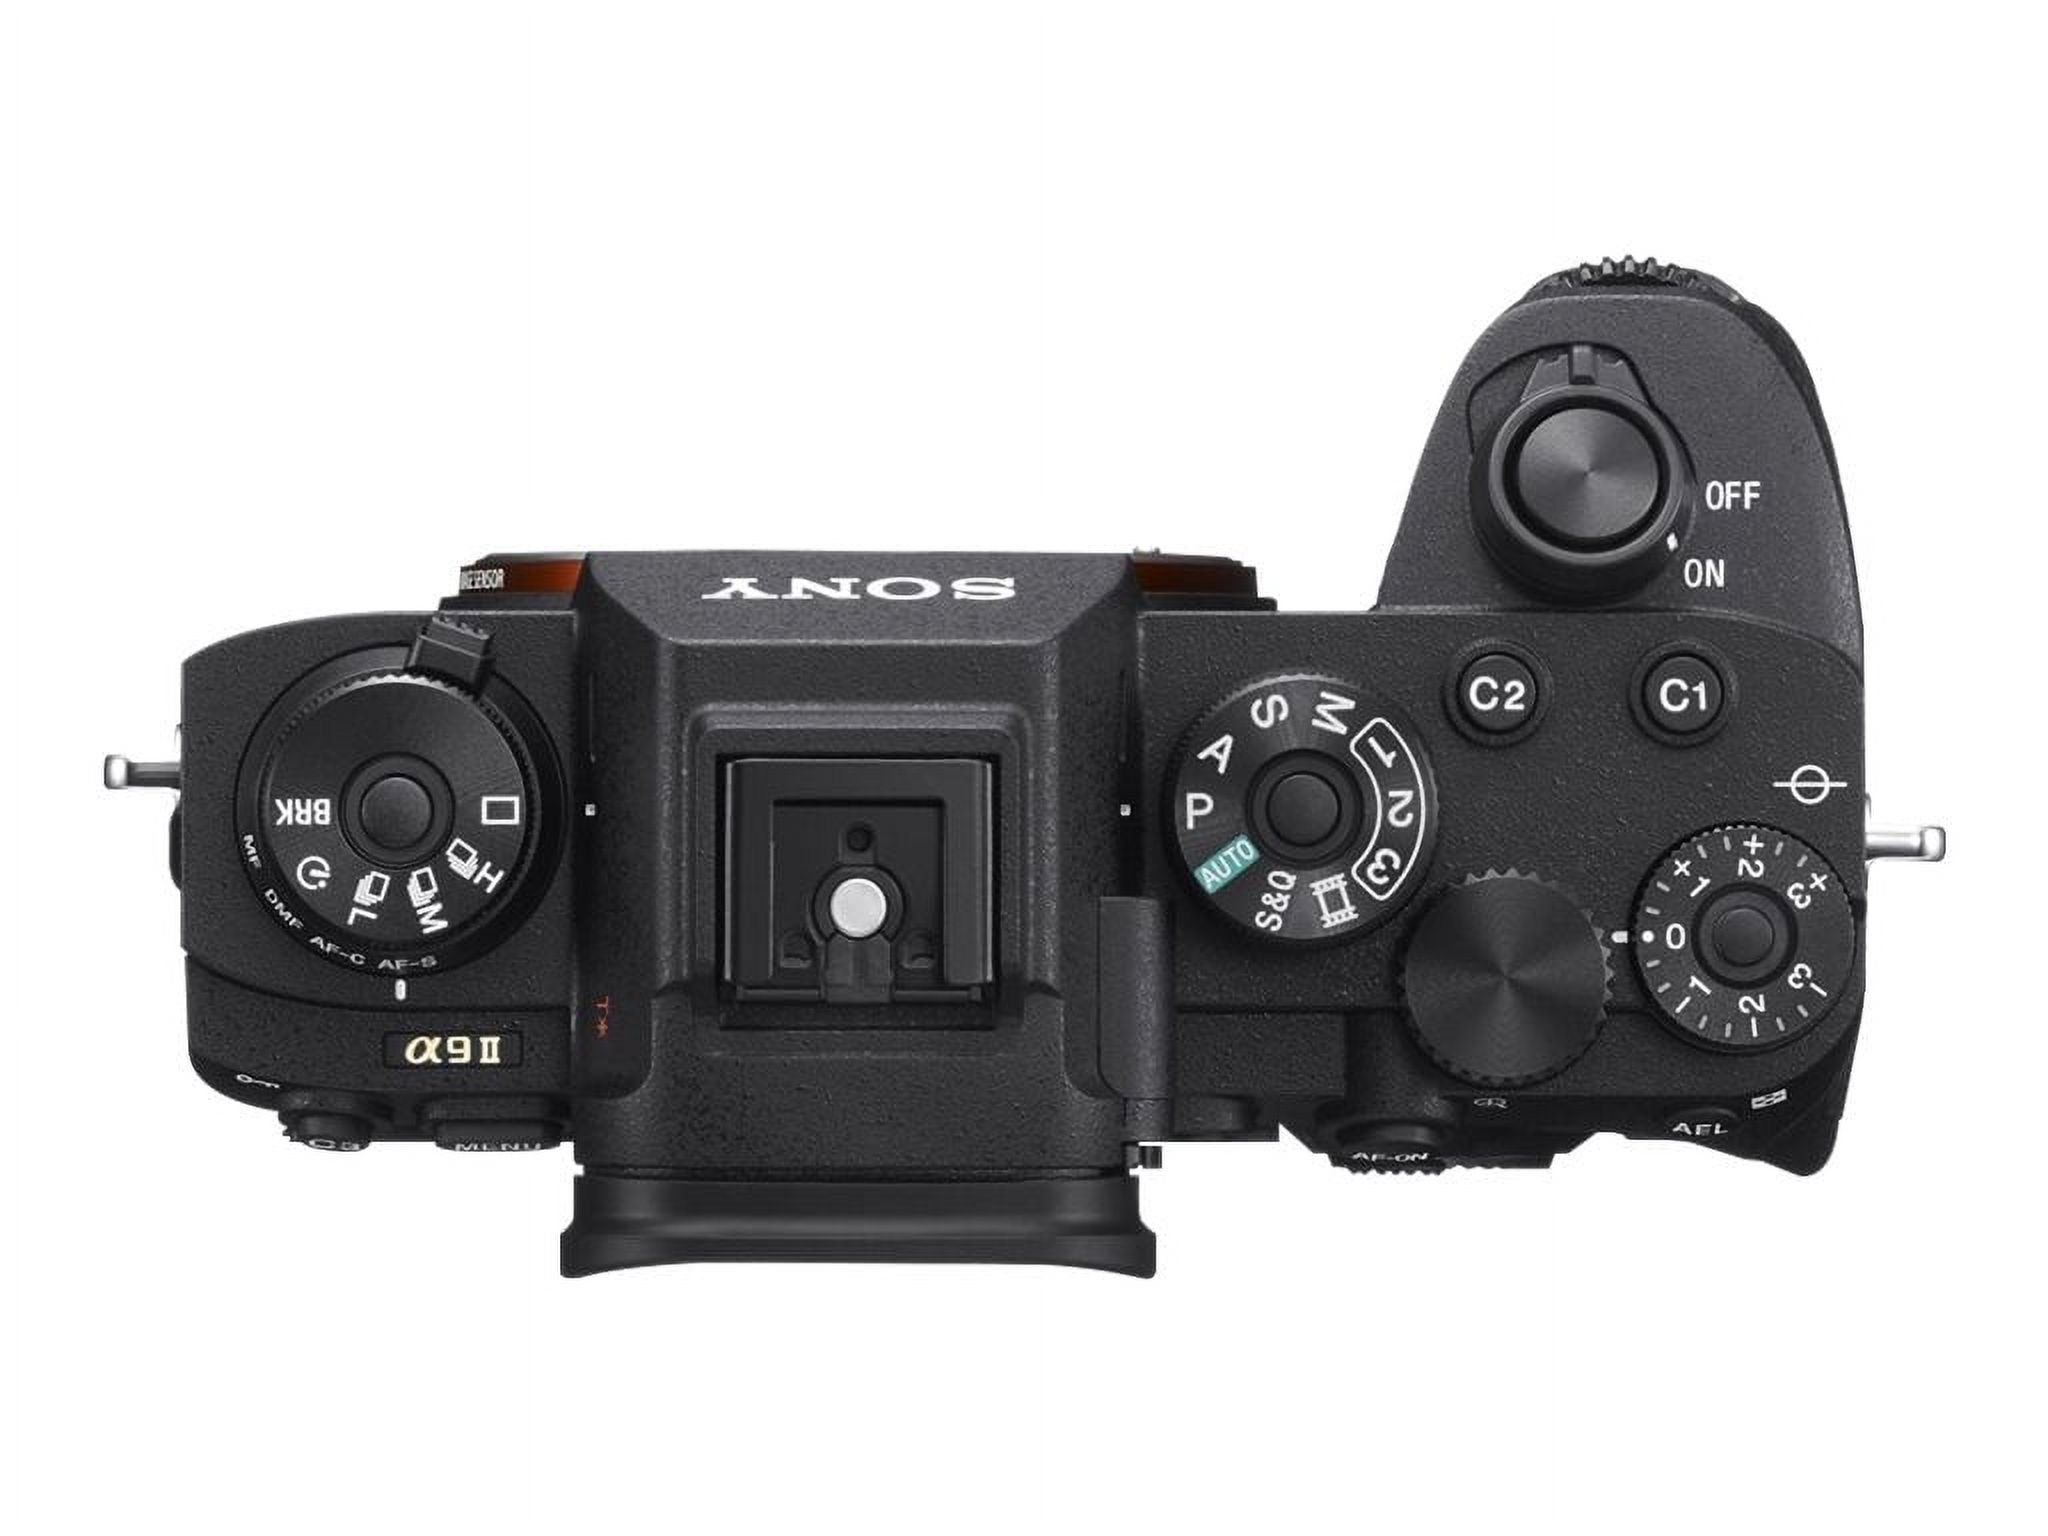 Sony a9 II ILCE-9M2 - Digital camera - mirrorless - 24.2 MP - Full Frame - 4K / 30 fps - body only - NFC, Wi-Fi, Bluetooth - black - image 2 of 14